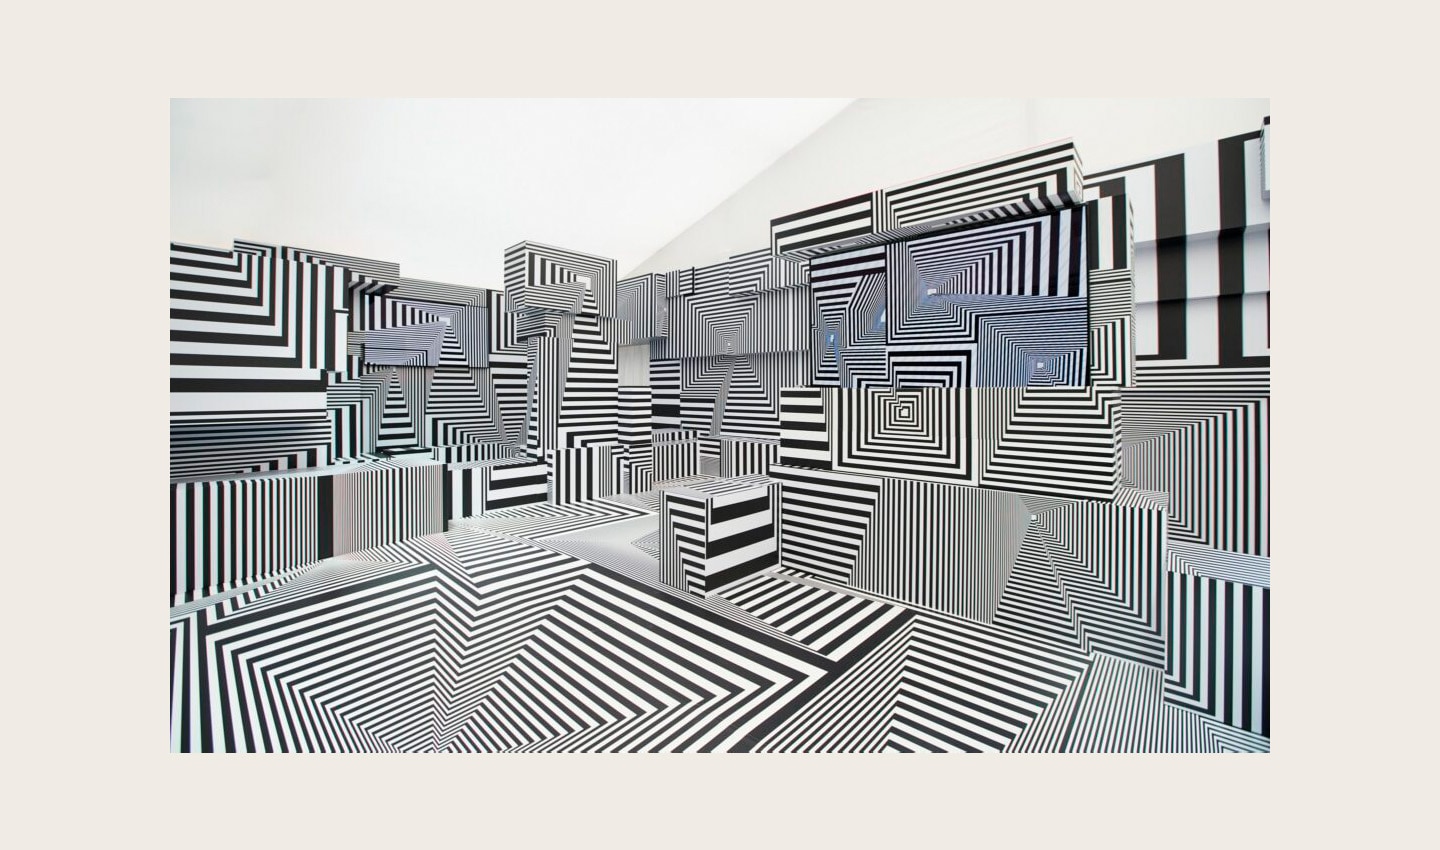 LG OLED-powered “Into the Maze” installation by the German artist, Tobias Rehberger, at Frieze London 2022